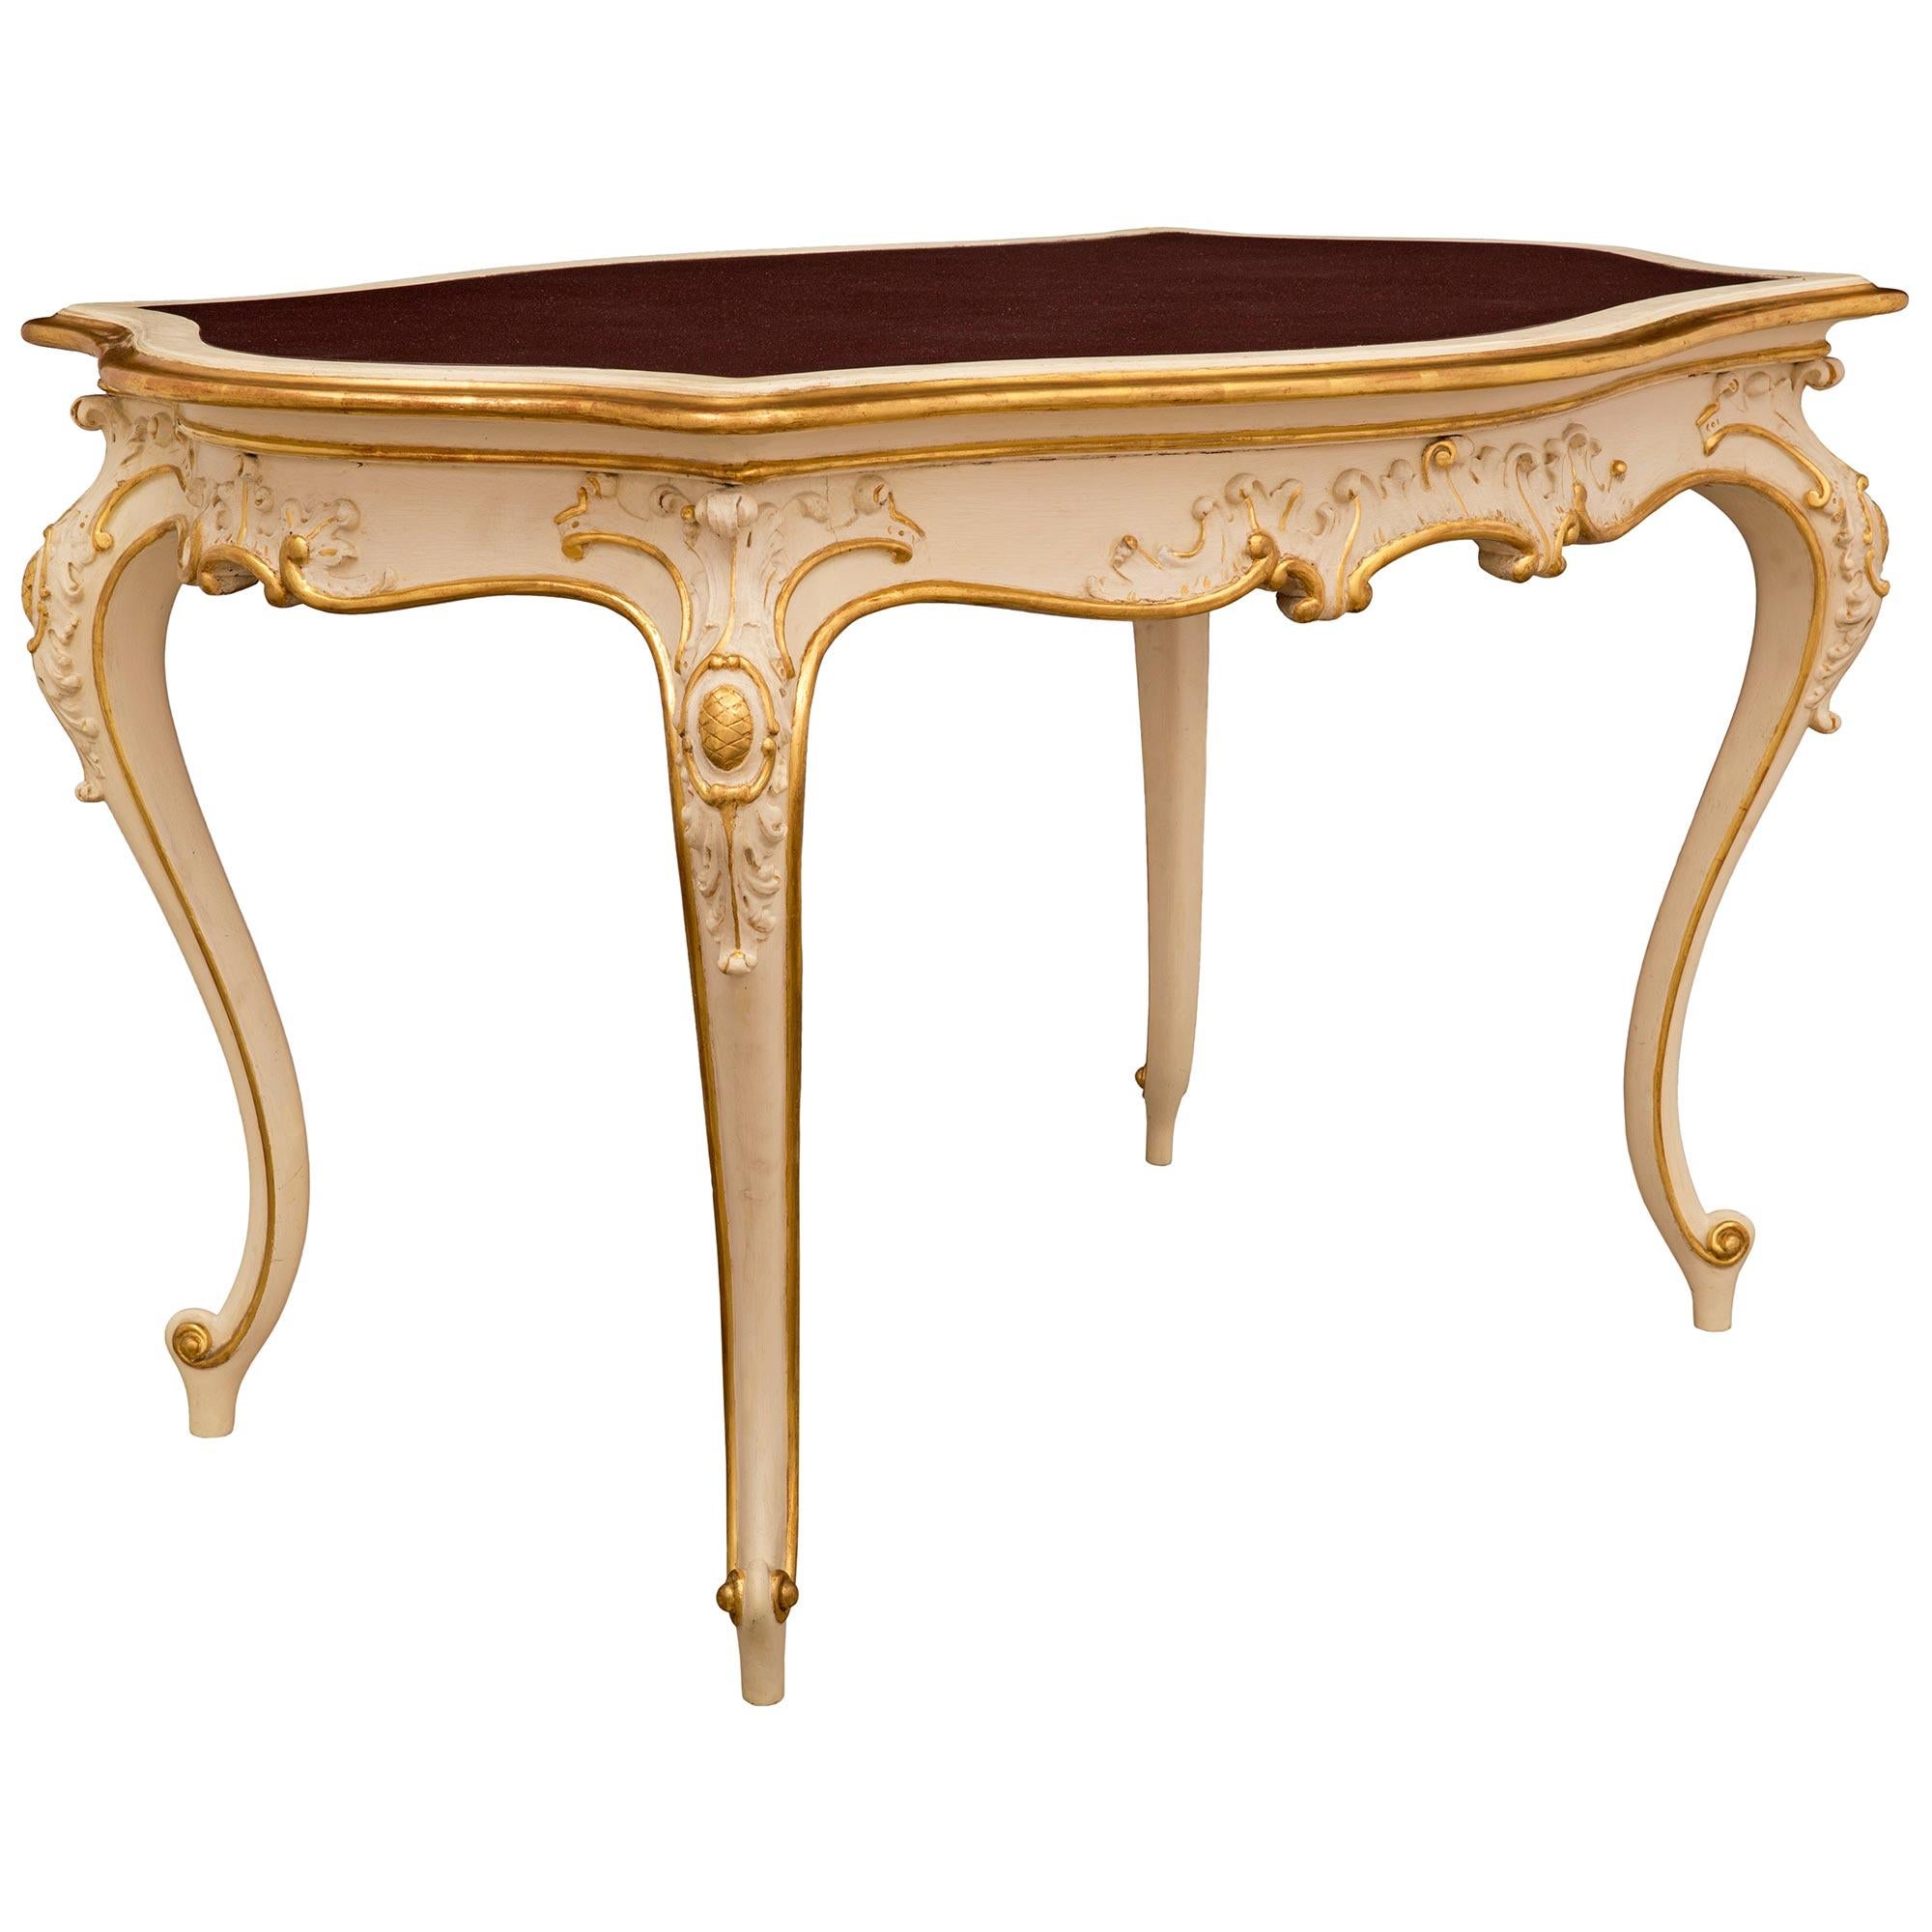 A beautiful and most elegant Italian 19th century Louis XV st. patinated, giltwood, and faux painted porphyry center table. The oblong scalloped shape table is raised by fine slender cabriole legs and topie shaped feet with lovely scrolled designs.